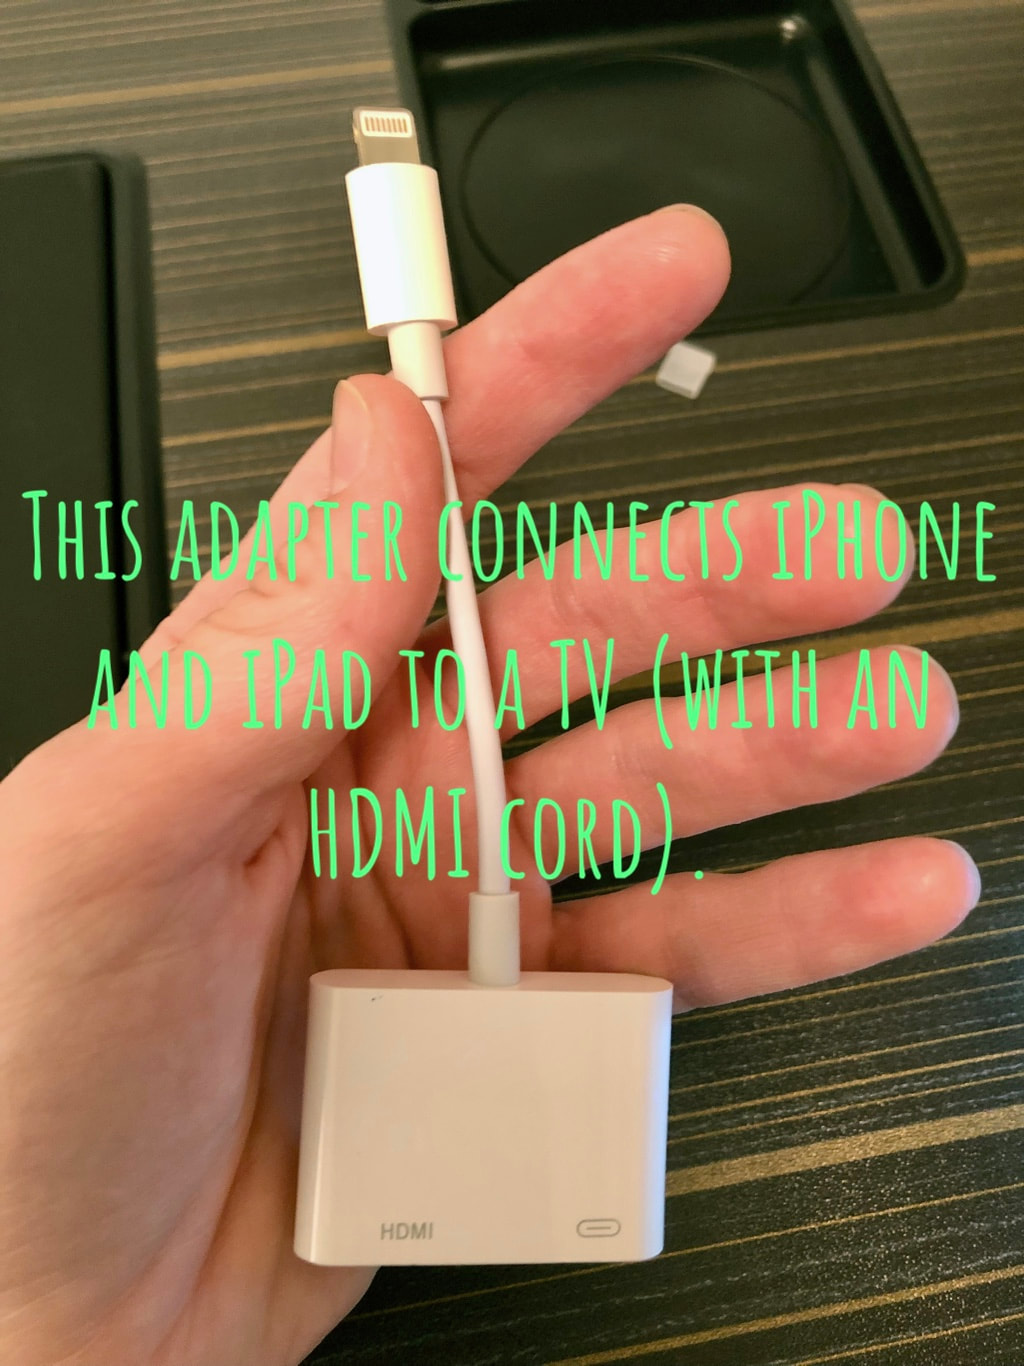 Adapter to connect iPhone and iPad to TV with an HDMI cord.